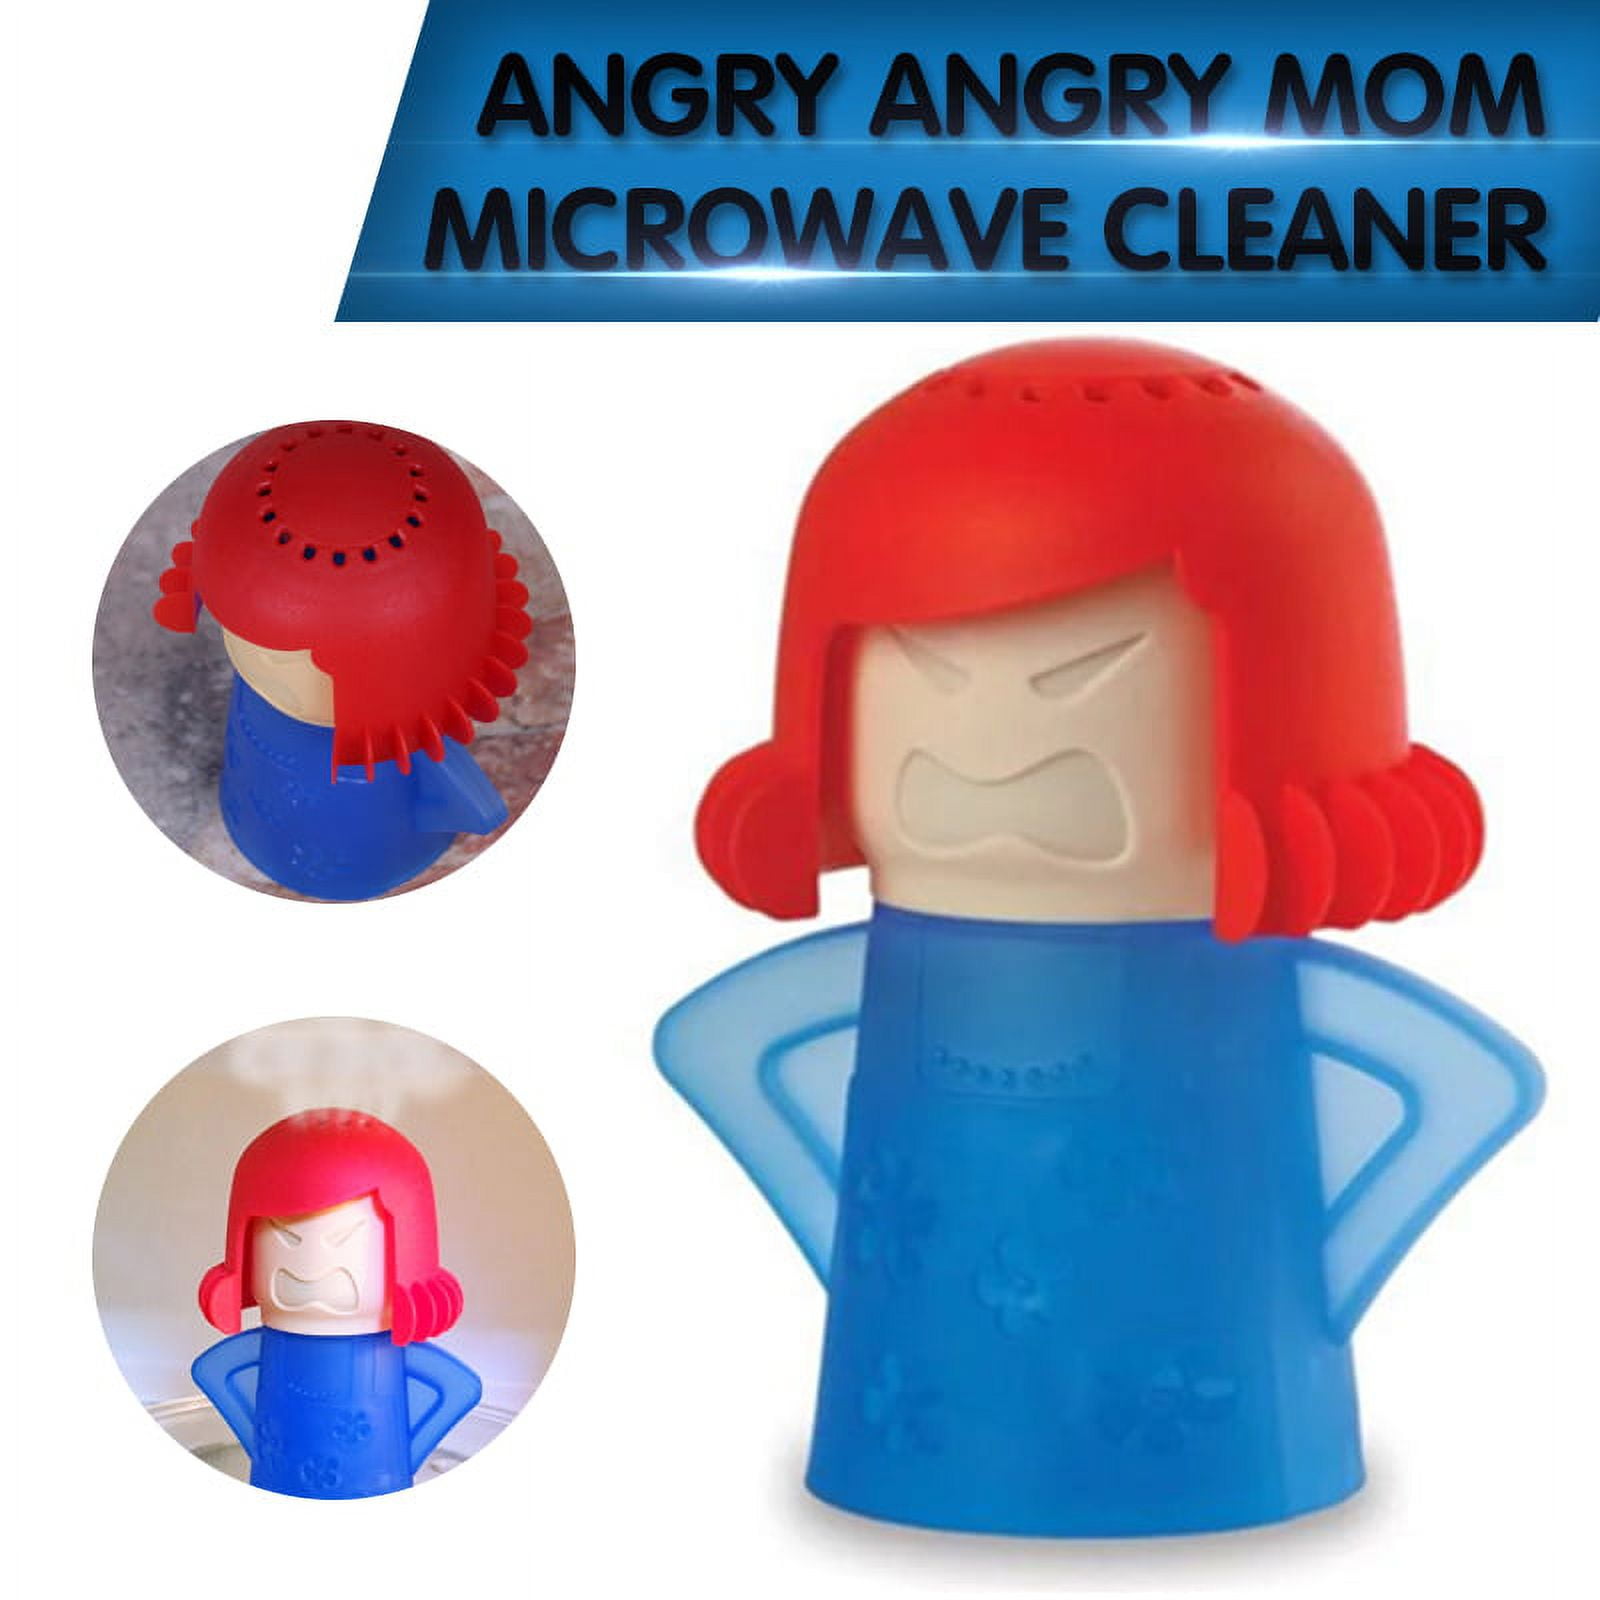 1pcs Kitchen Microwave Cleaner Angry Mama Oven Steam Easily Cleans tool  home Refrigerator Cleaning Disinfecting Appliances